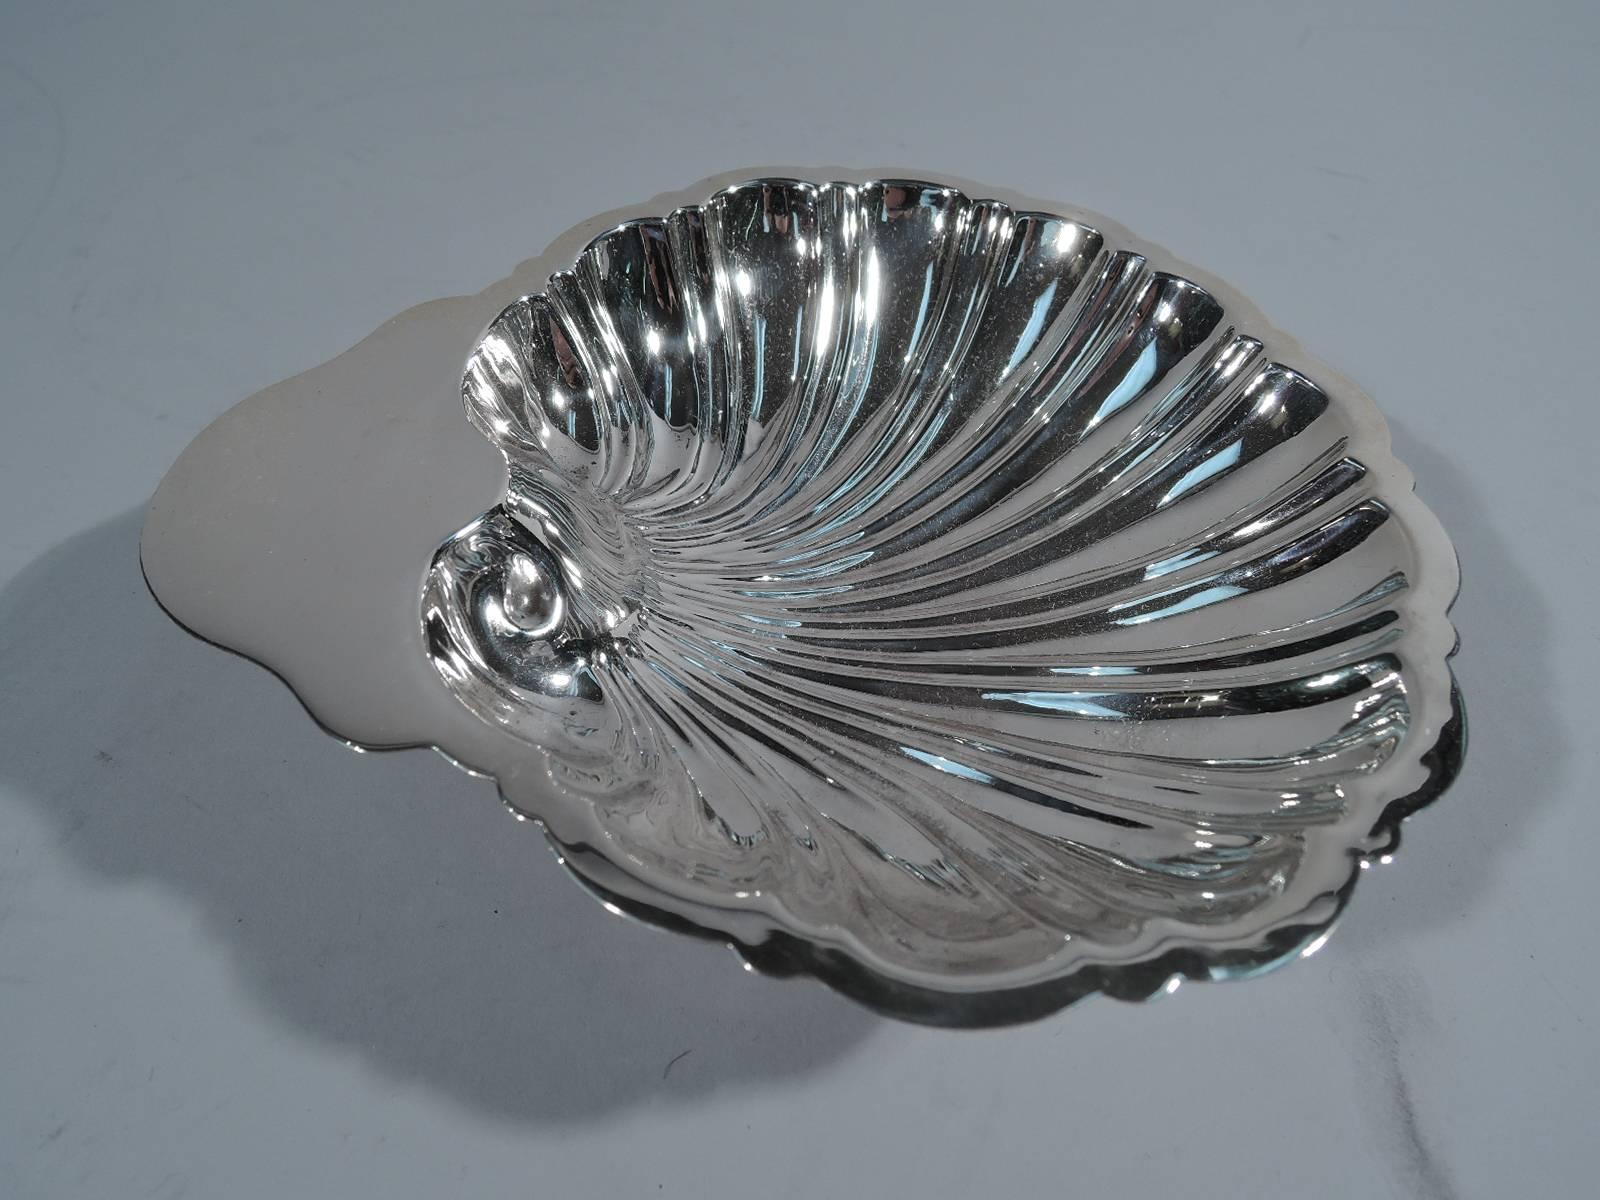 American sterling silver scallop shell dish. Retailed by Brand-Chatillon in New York, circa 1940. Fine and dynamic flutes and sold handle. Rests on three balls. Retailer’s mark and no. 180. Very faint hallmark appears to be for Revere Silver (a